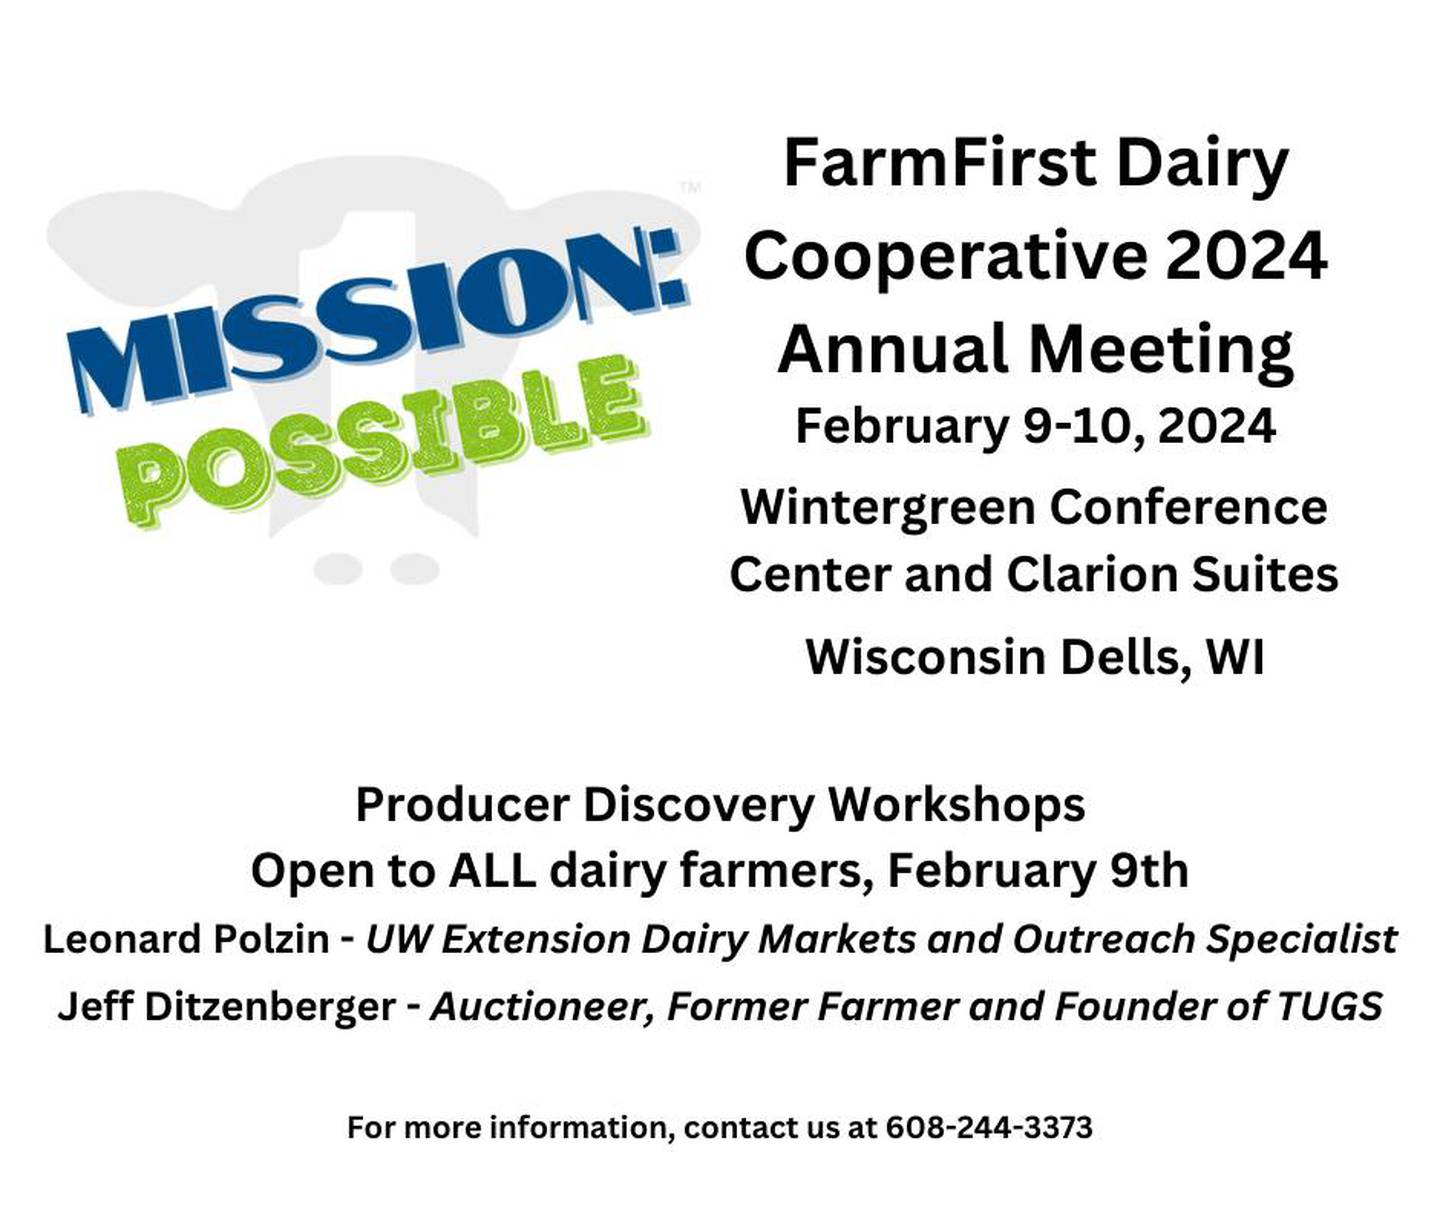 FarmFirst Dairy Cooperative welcomes all dairy farmers to attend the cooperative’s Producer Discovery Workshop series as part of its 2024 Annual Meeting taking place on Feb. 9 at the Wintergreen Conference Center and Clarion Suites in Wisconsin Dells.